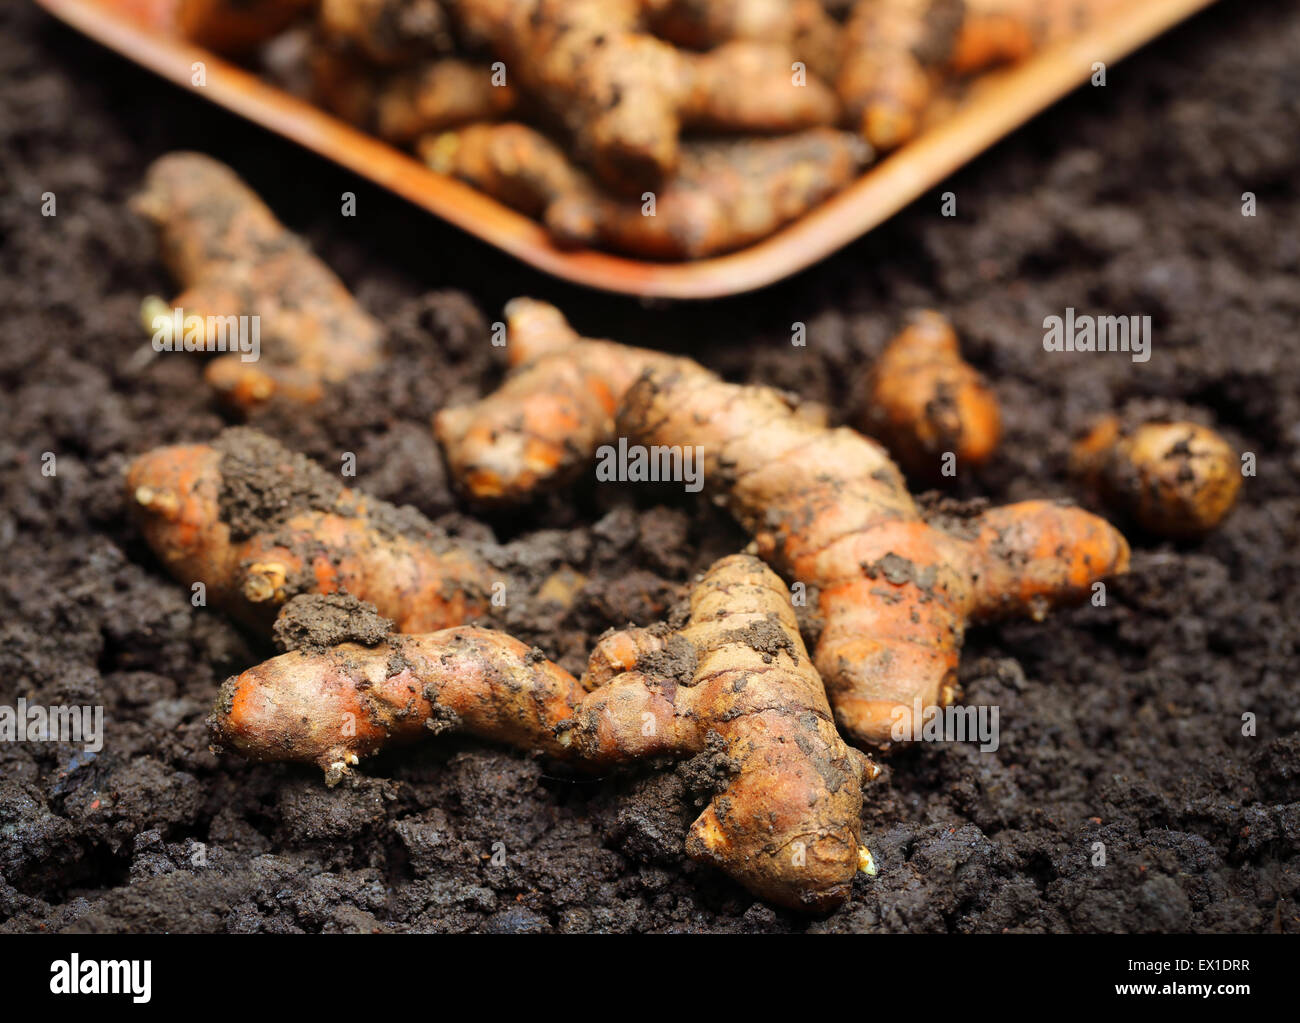 Newly harvested Turmeric in cultivated soil Stock Photo